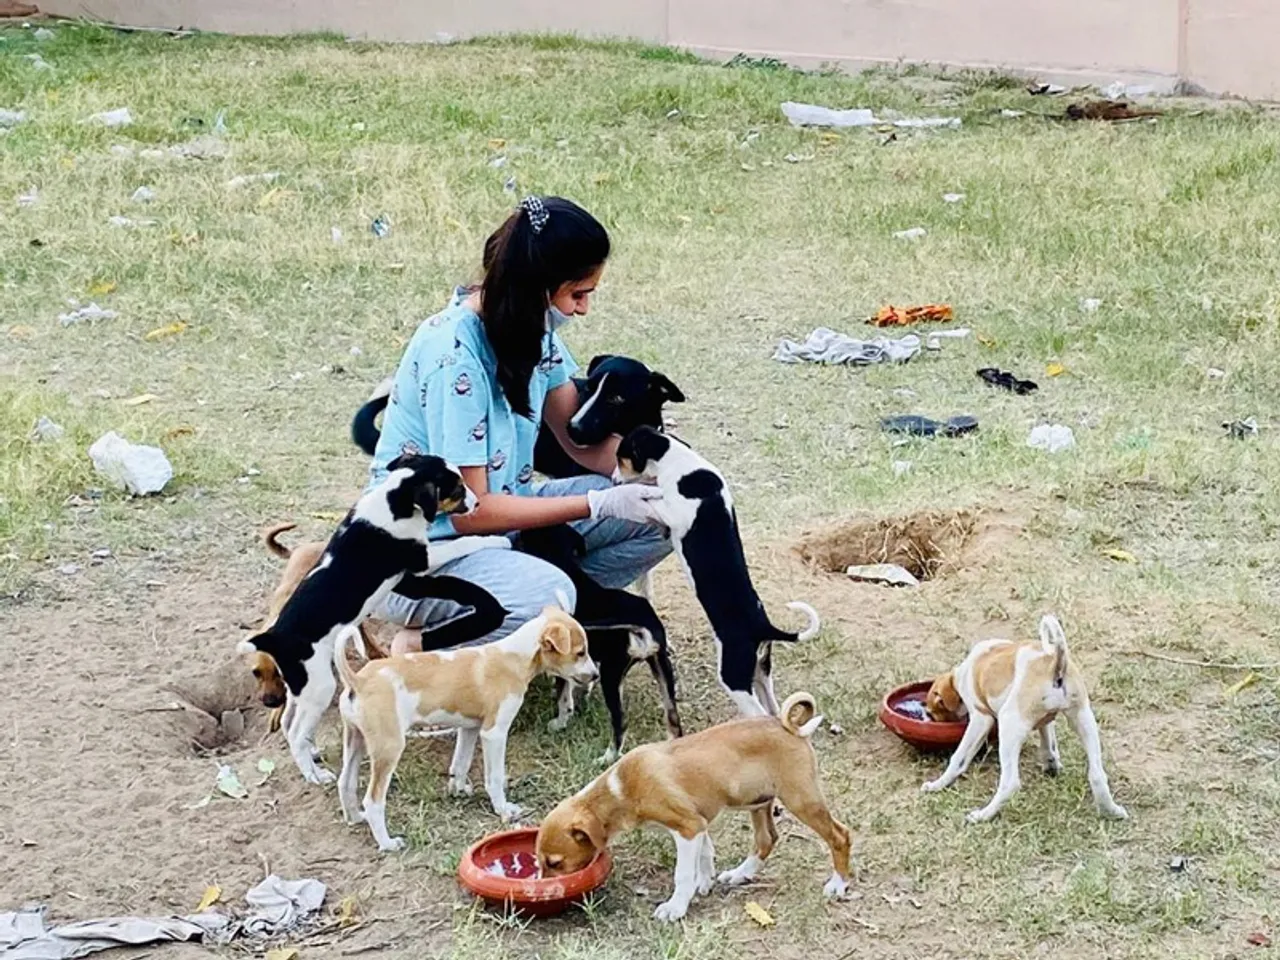 In pictures: hands that feed stray animals during COVID-19 lockdown